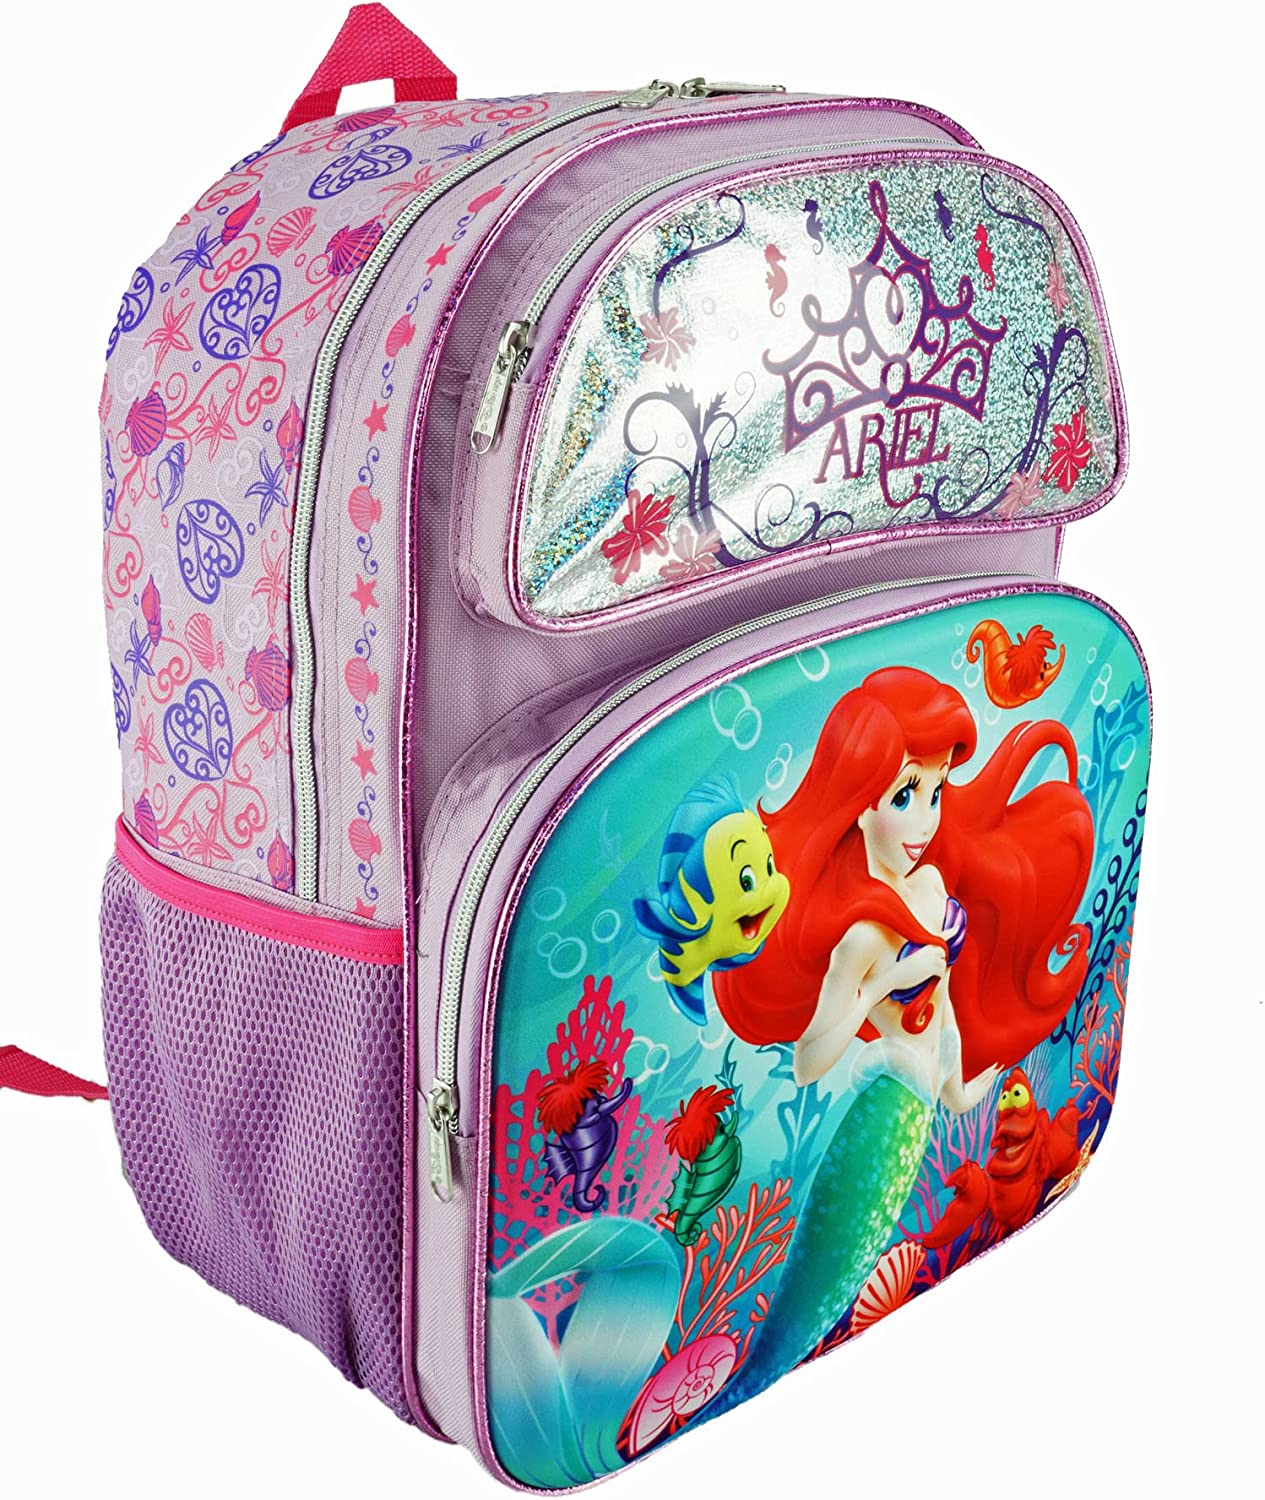 The Little Mermaid Ariel Backpack Large 16-inch 3-D EVA Molded